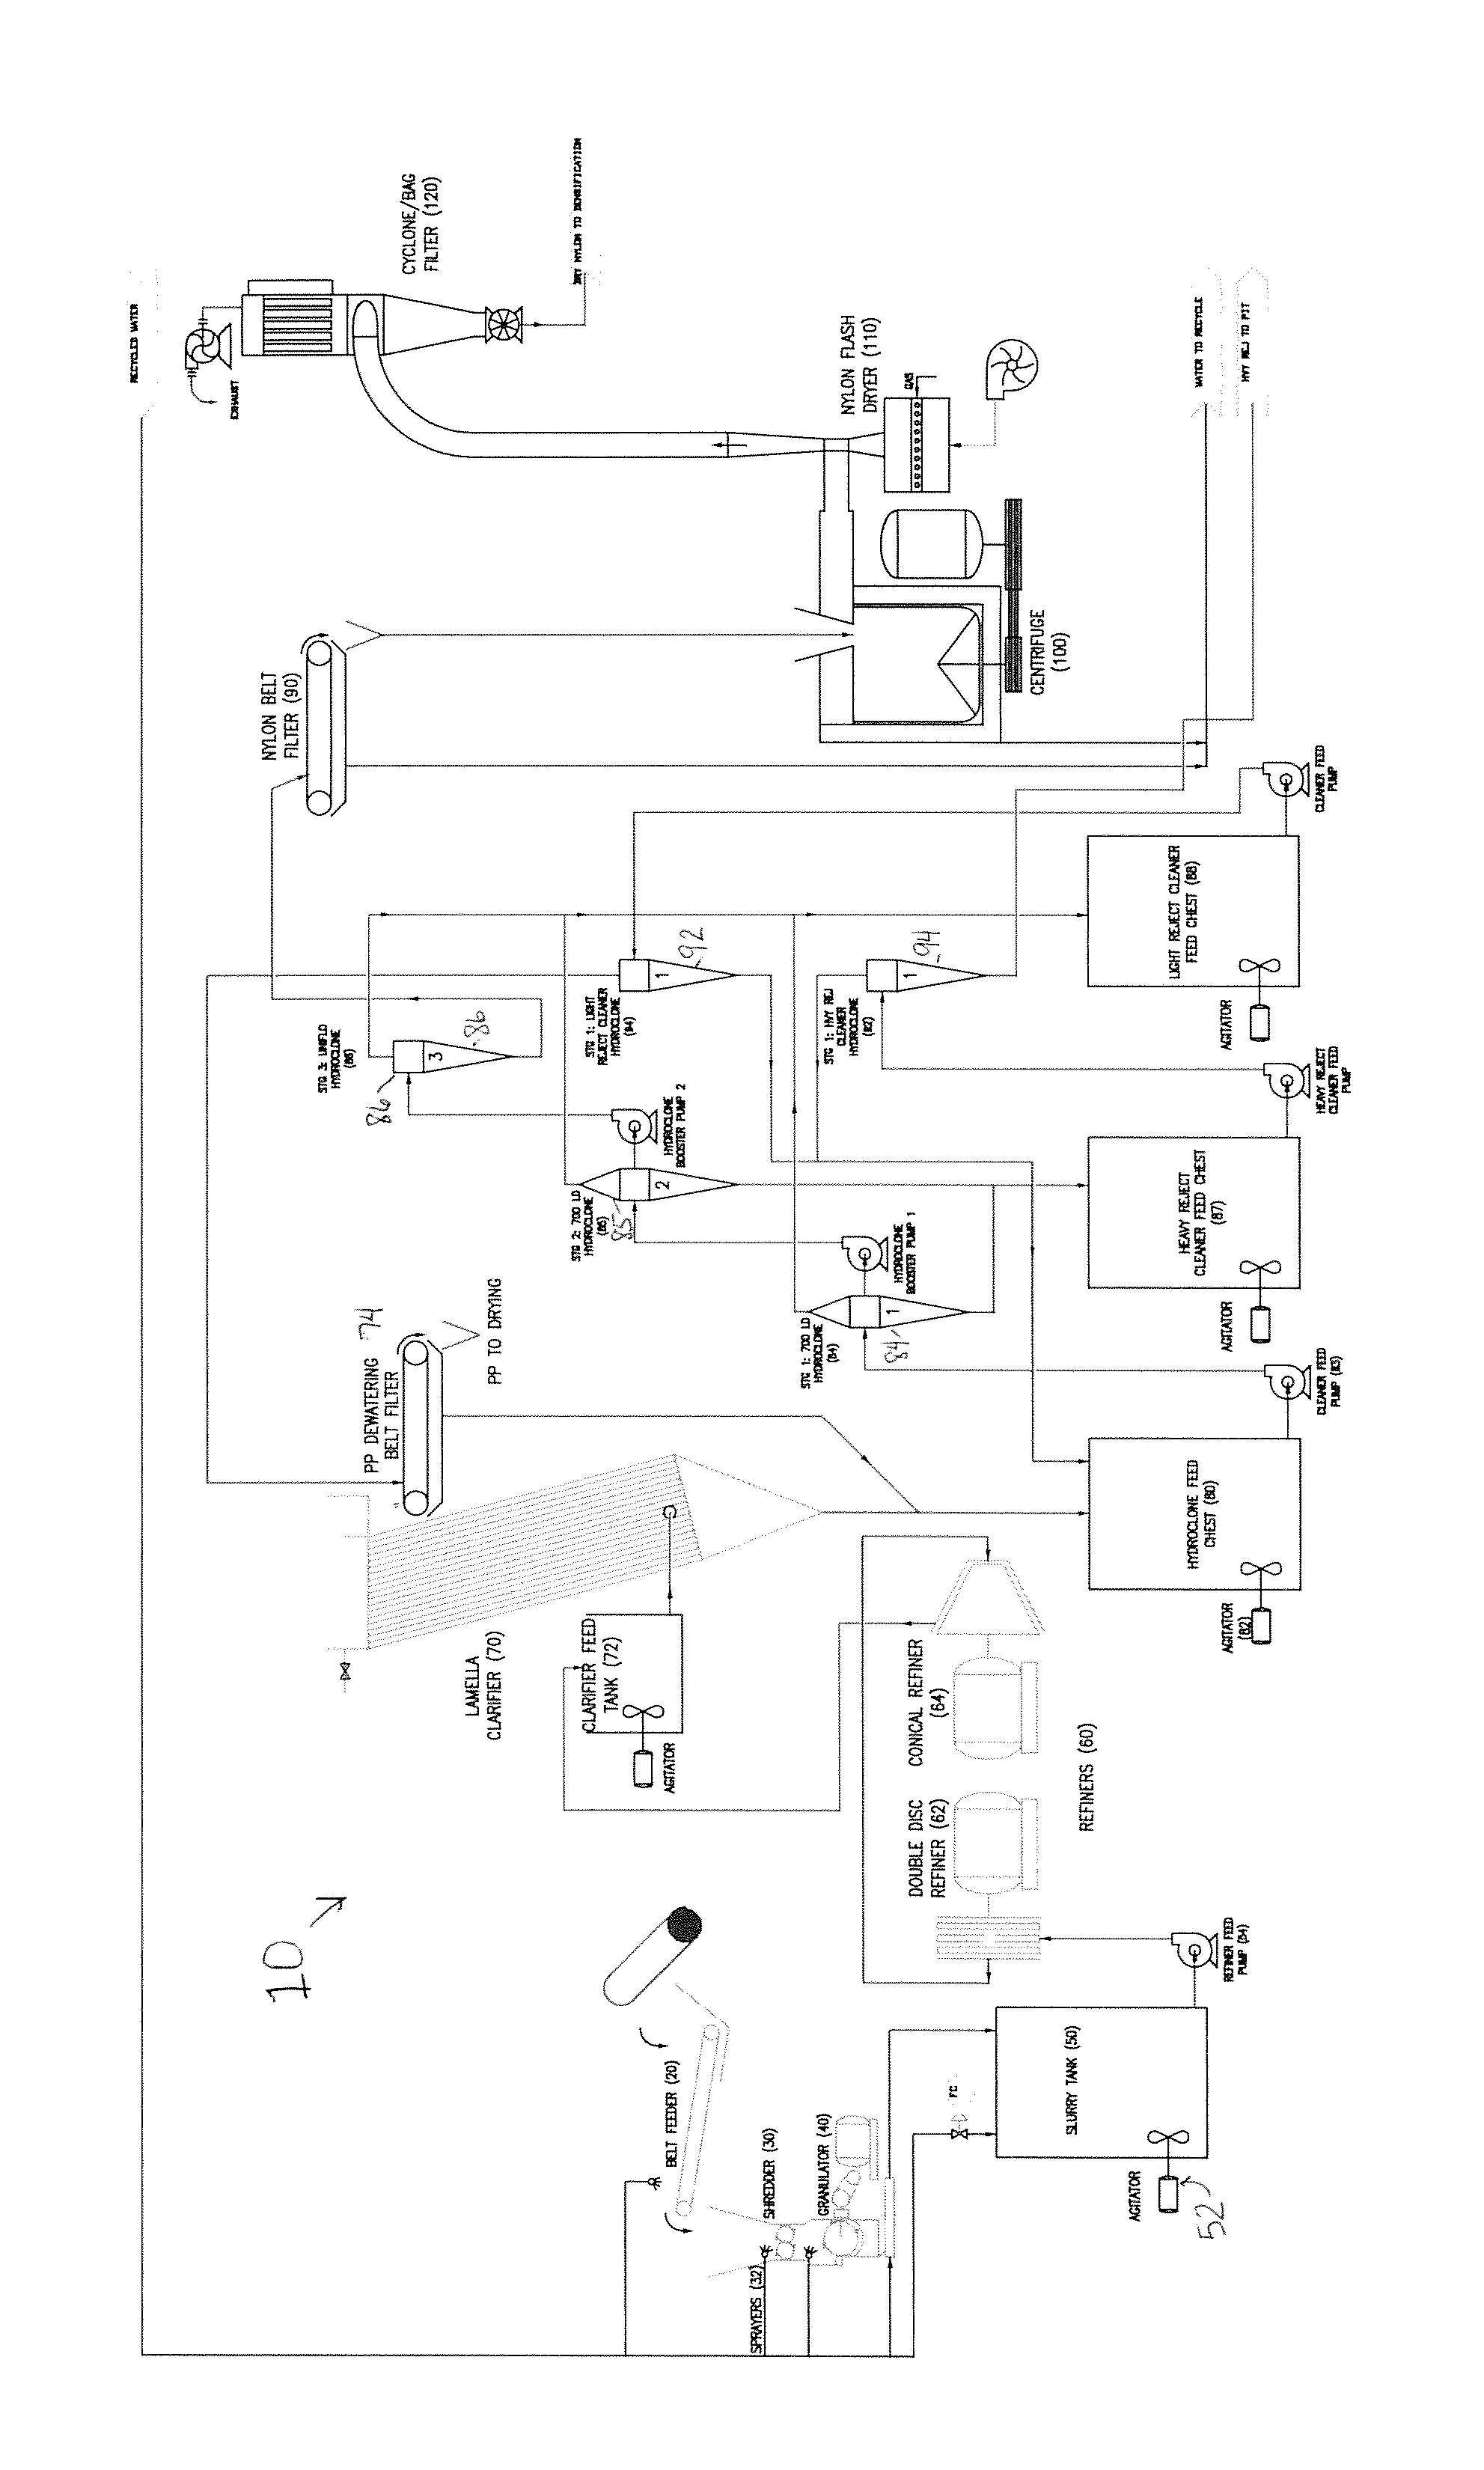 Process for recovering nylon and polypropylene from a nylon fiber source